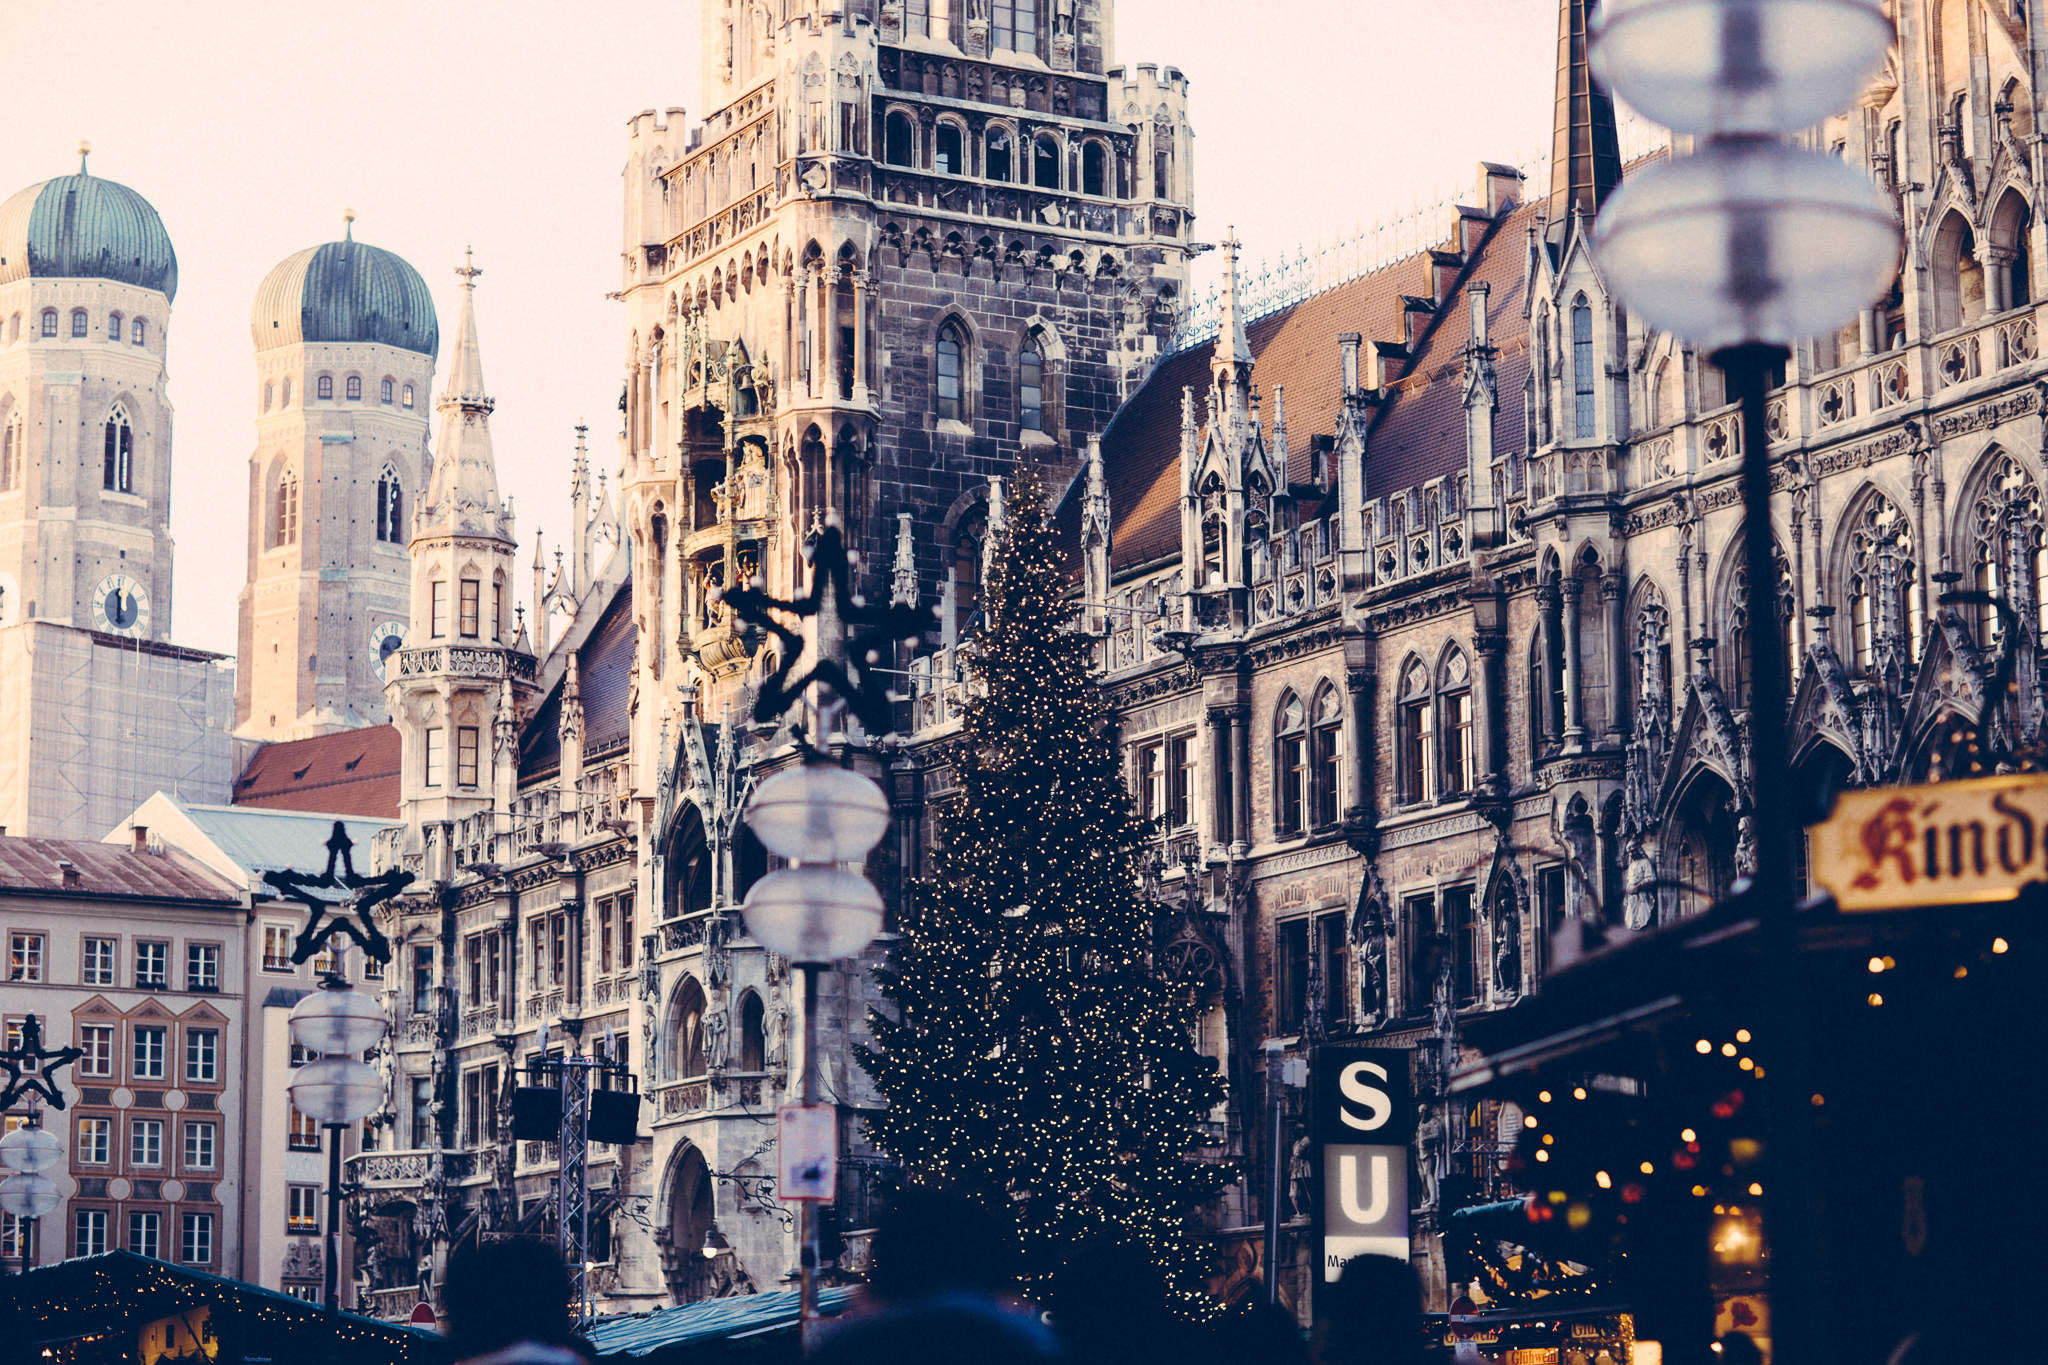 christmas markets in munich, germany - travel photos